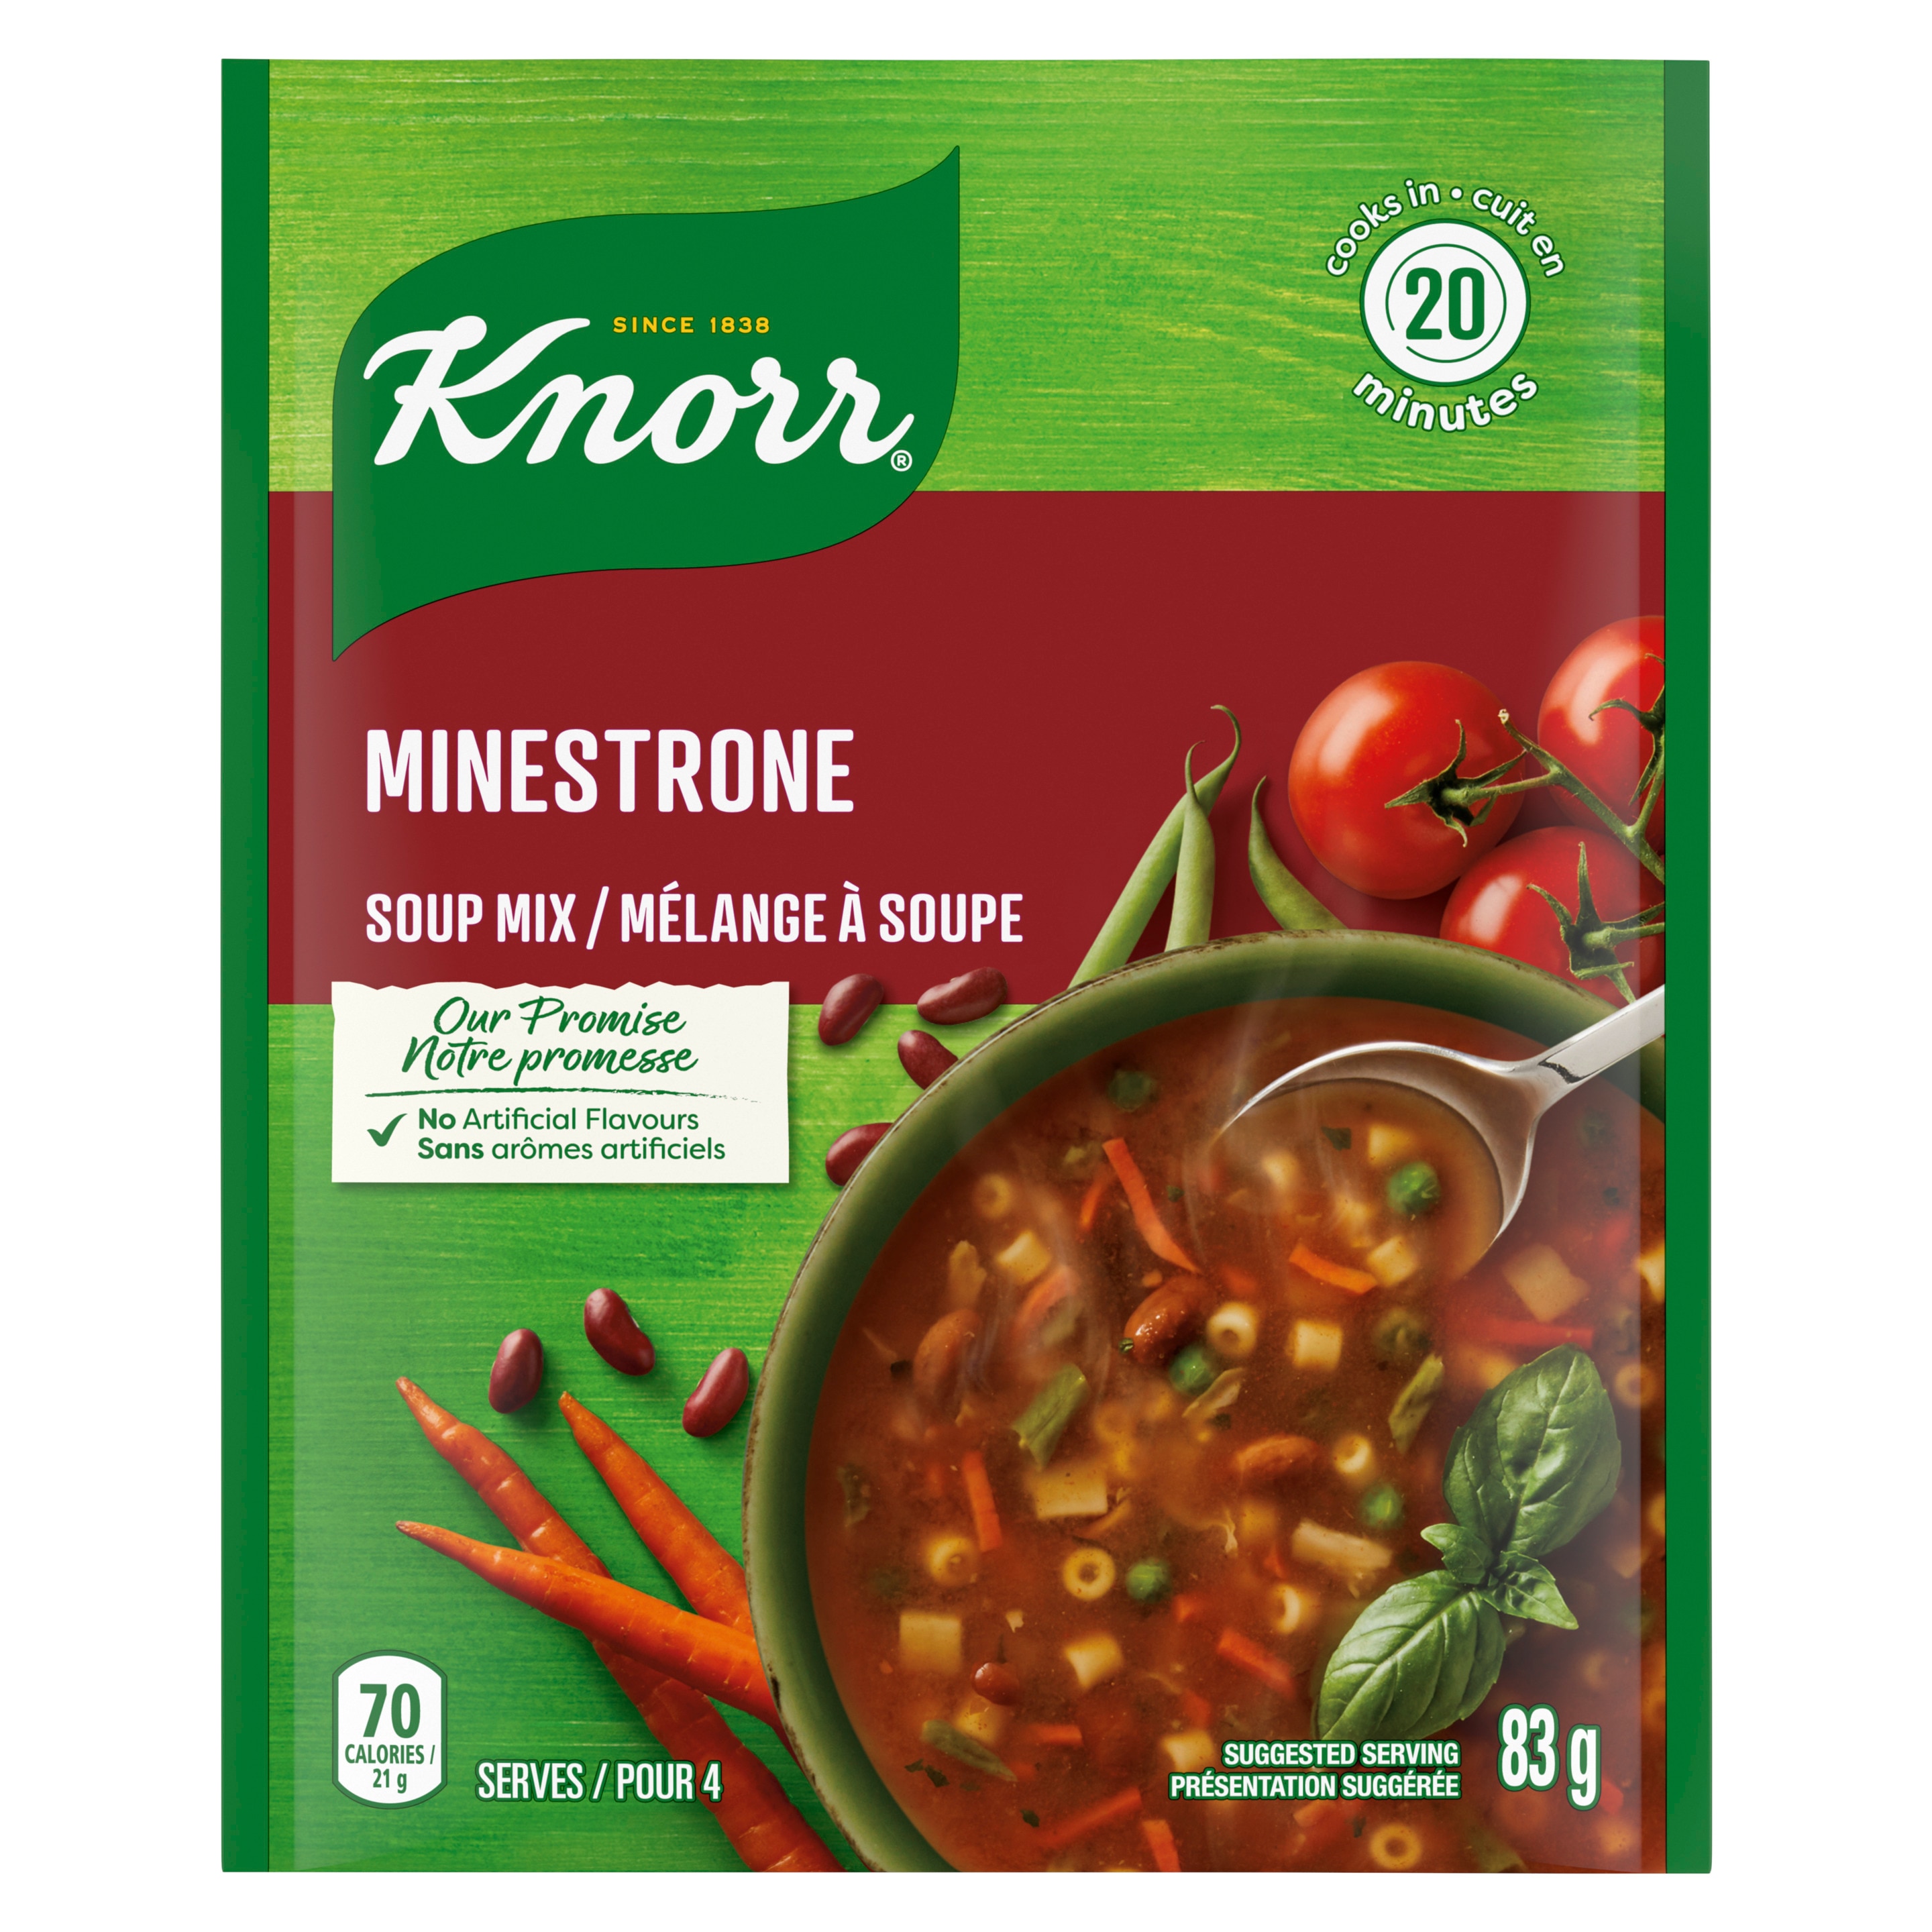 Knorr Dry Soups